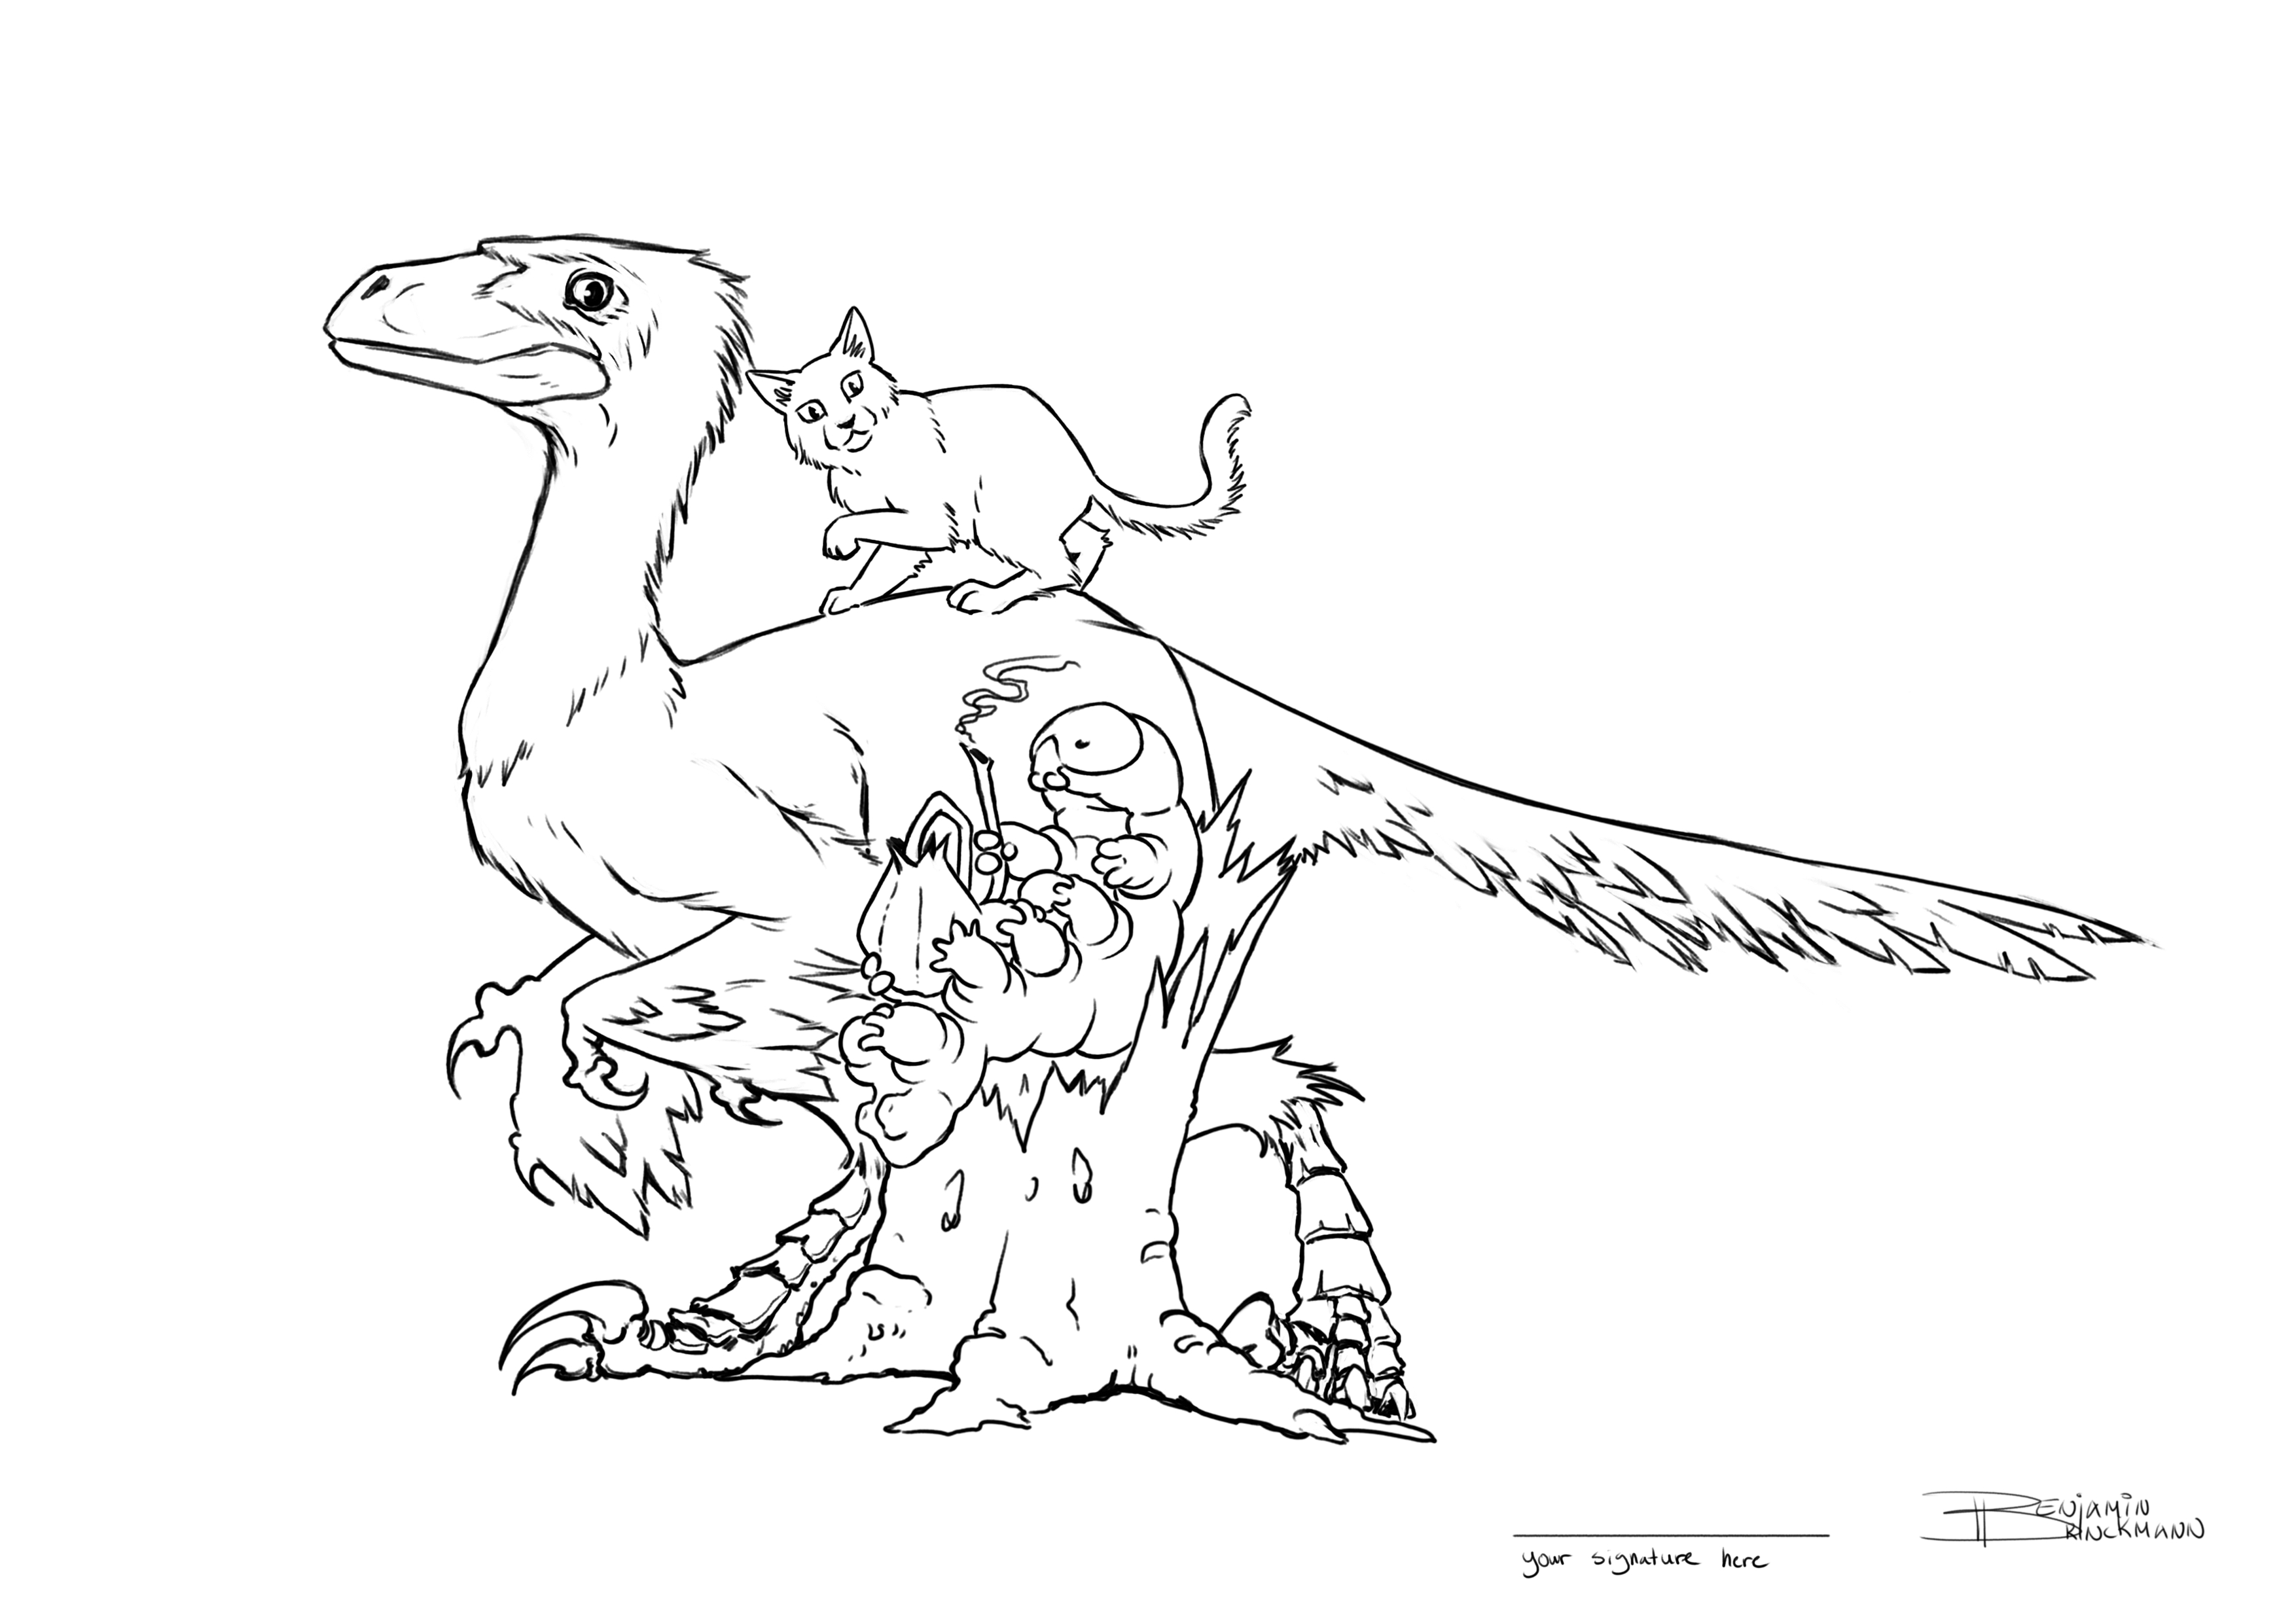 a pencil drawing of a cat riding a dinosaur passing the caterpillar from Alice in Wonderland, sitting on a tree stump.